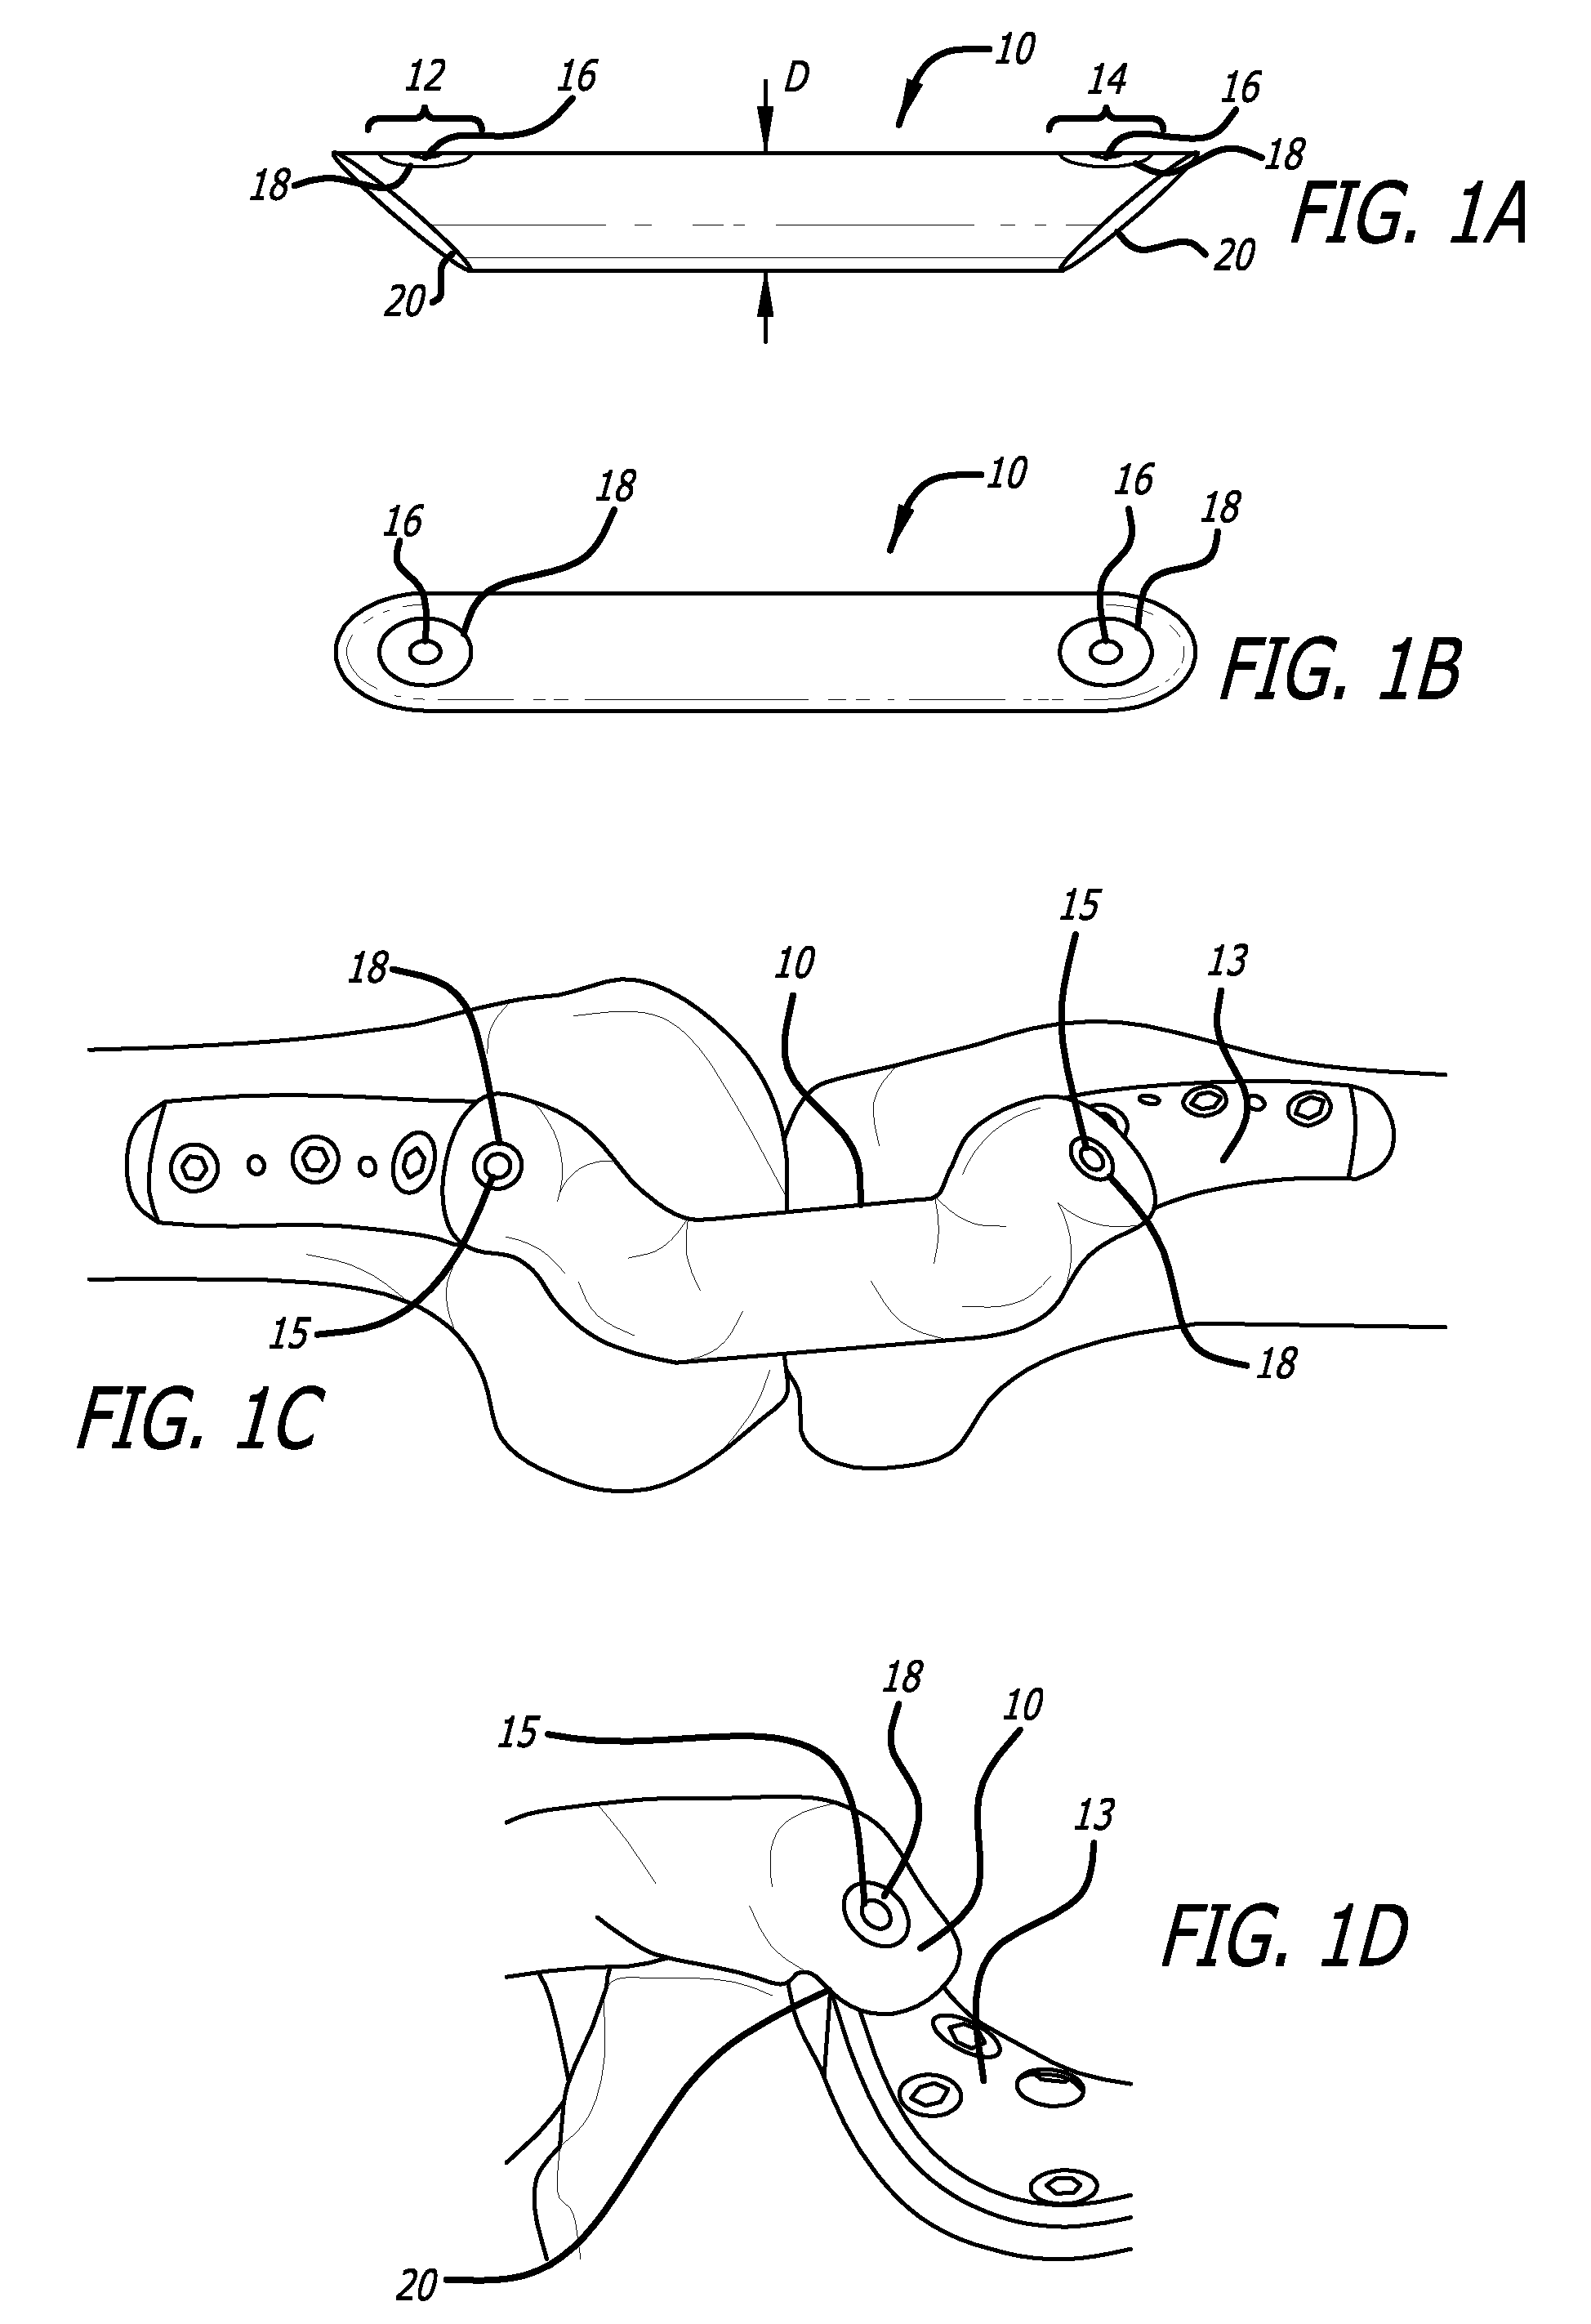 Sheaths for extra-articular implantable systems